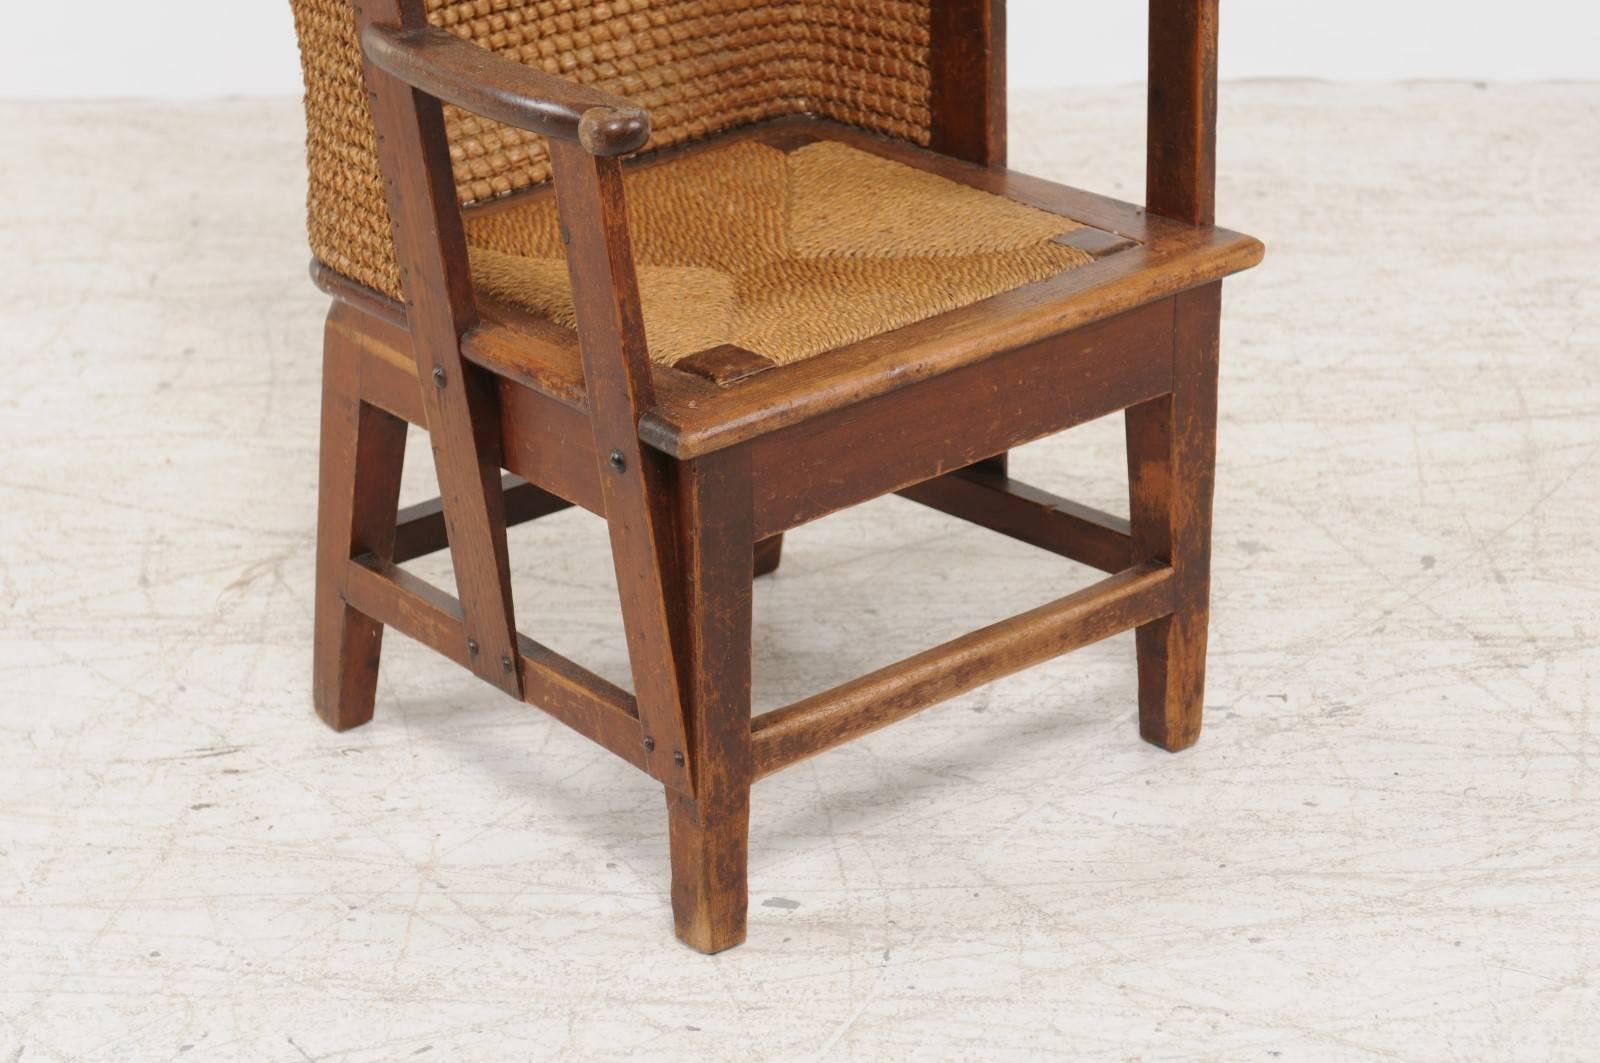 Rustic Scottish Late 19th Century Orkney Chair with Wraparound Handwoven Straw Back